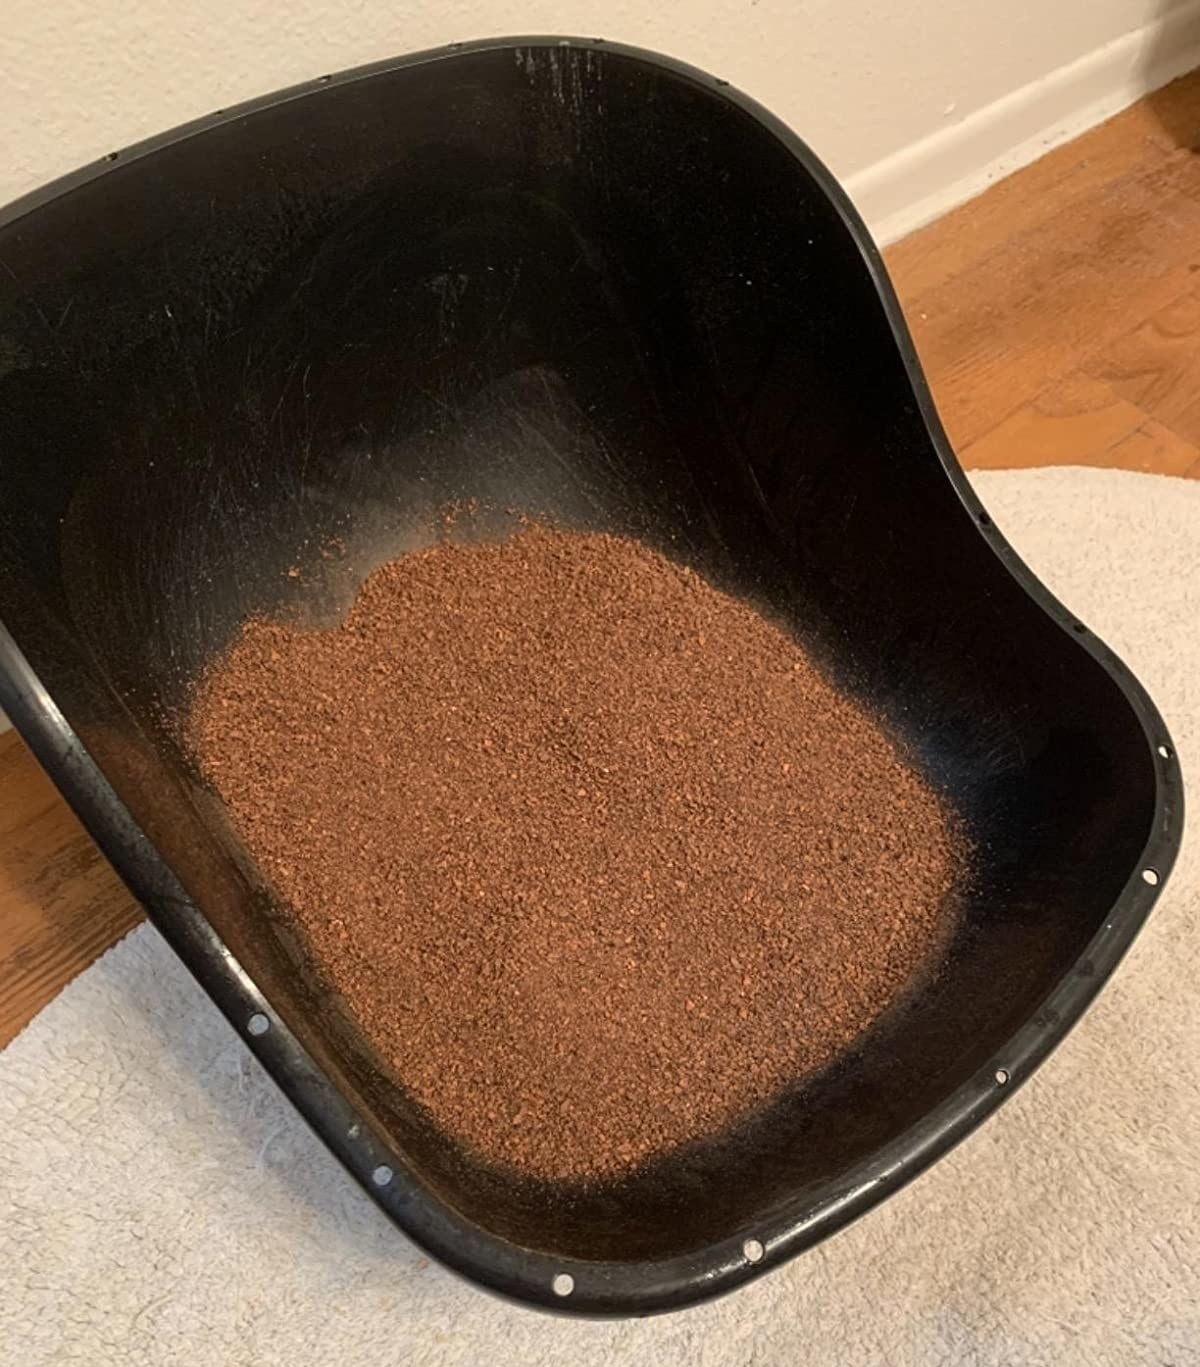 Reviewer image of walnut-based cat litter in litter box